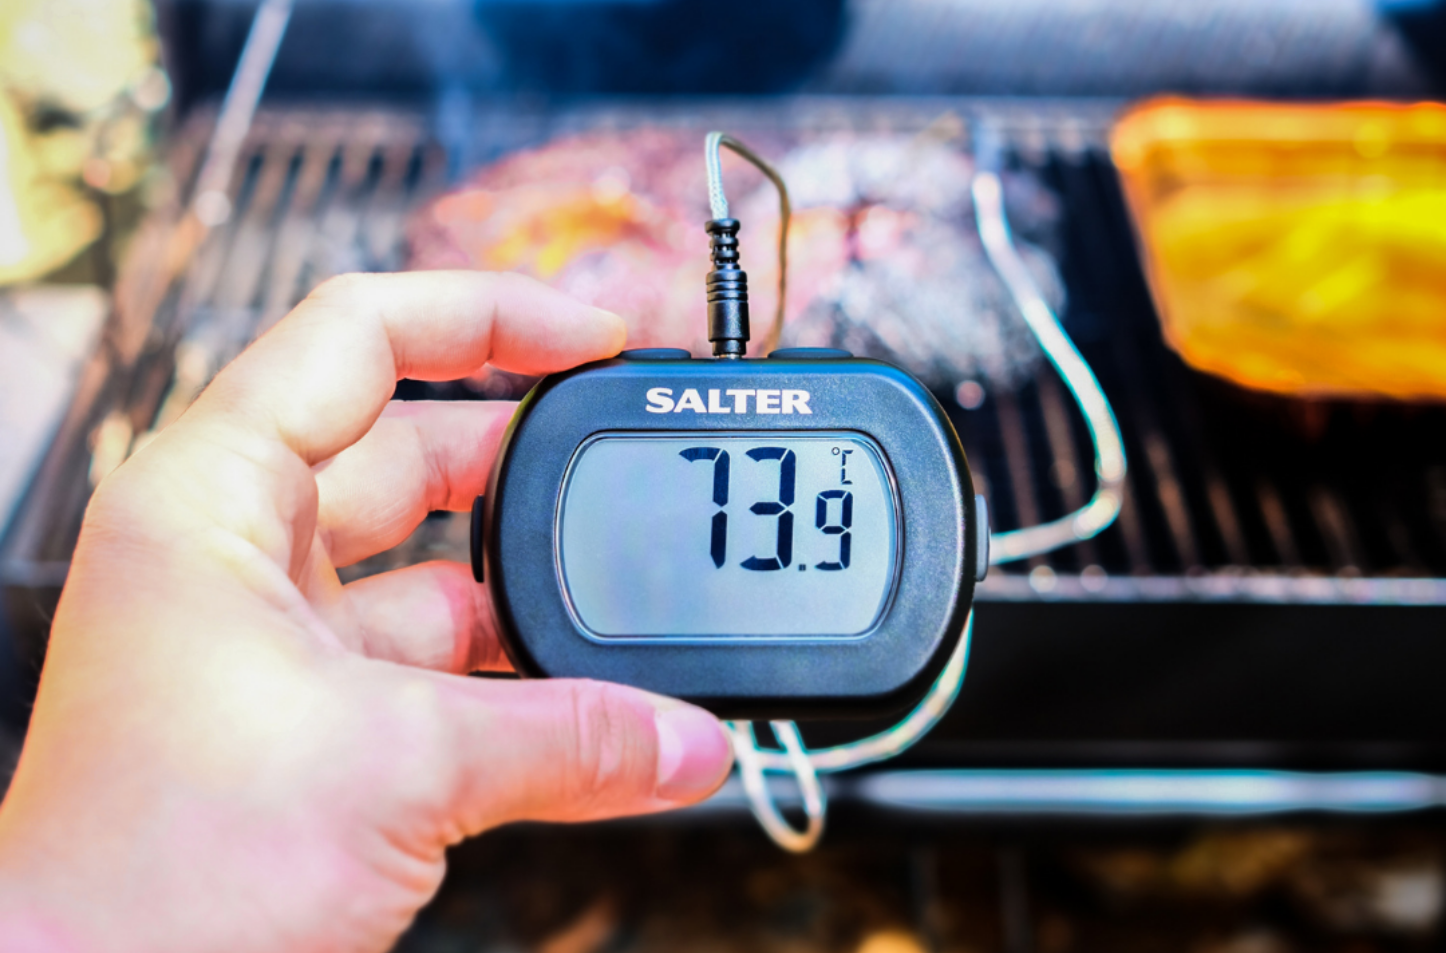 Salter Meat Thermometer showing 73.9 degrees C